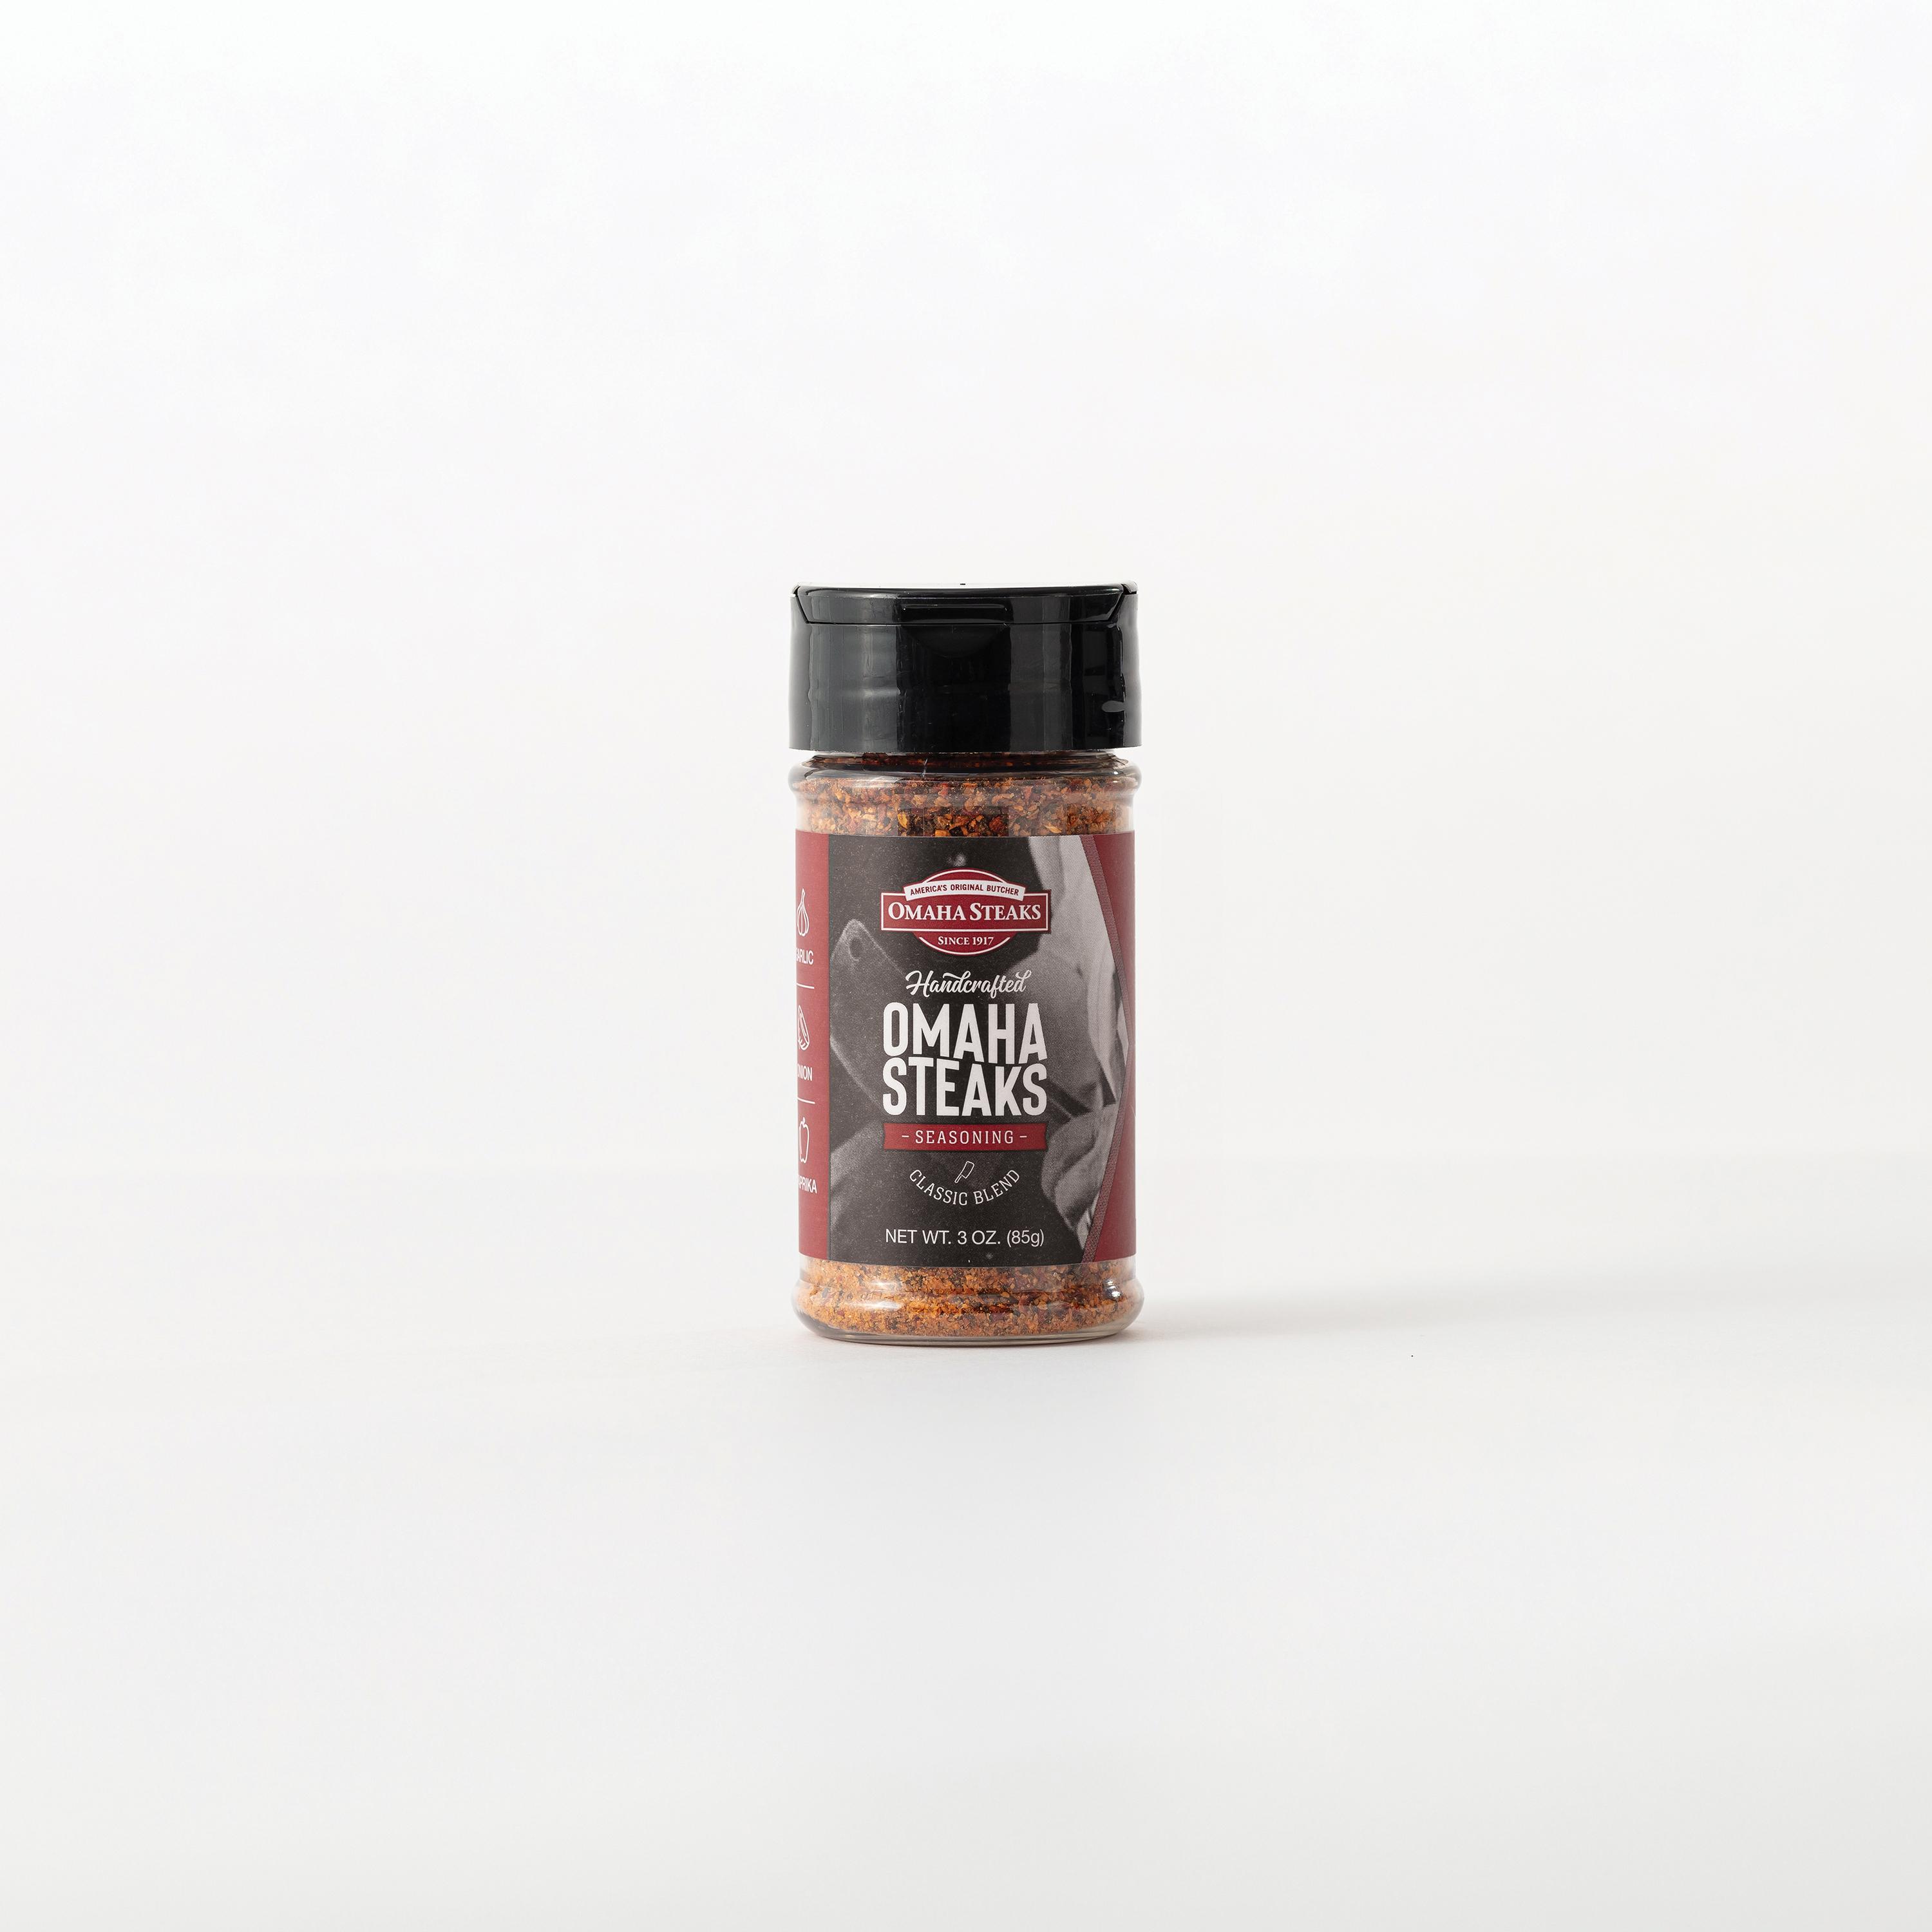 Red Lobster Signature Seafood Seasoning 5 oz. Bottle (Pack of 3)